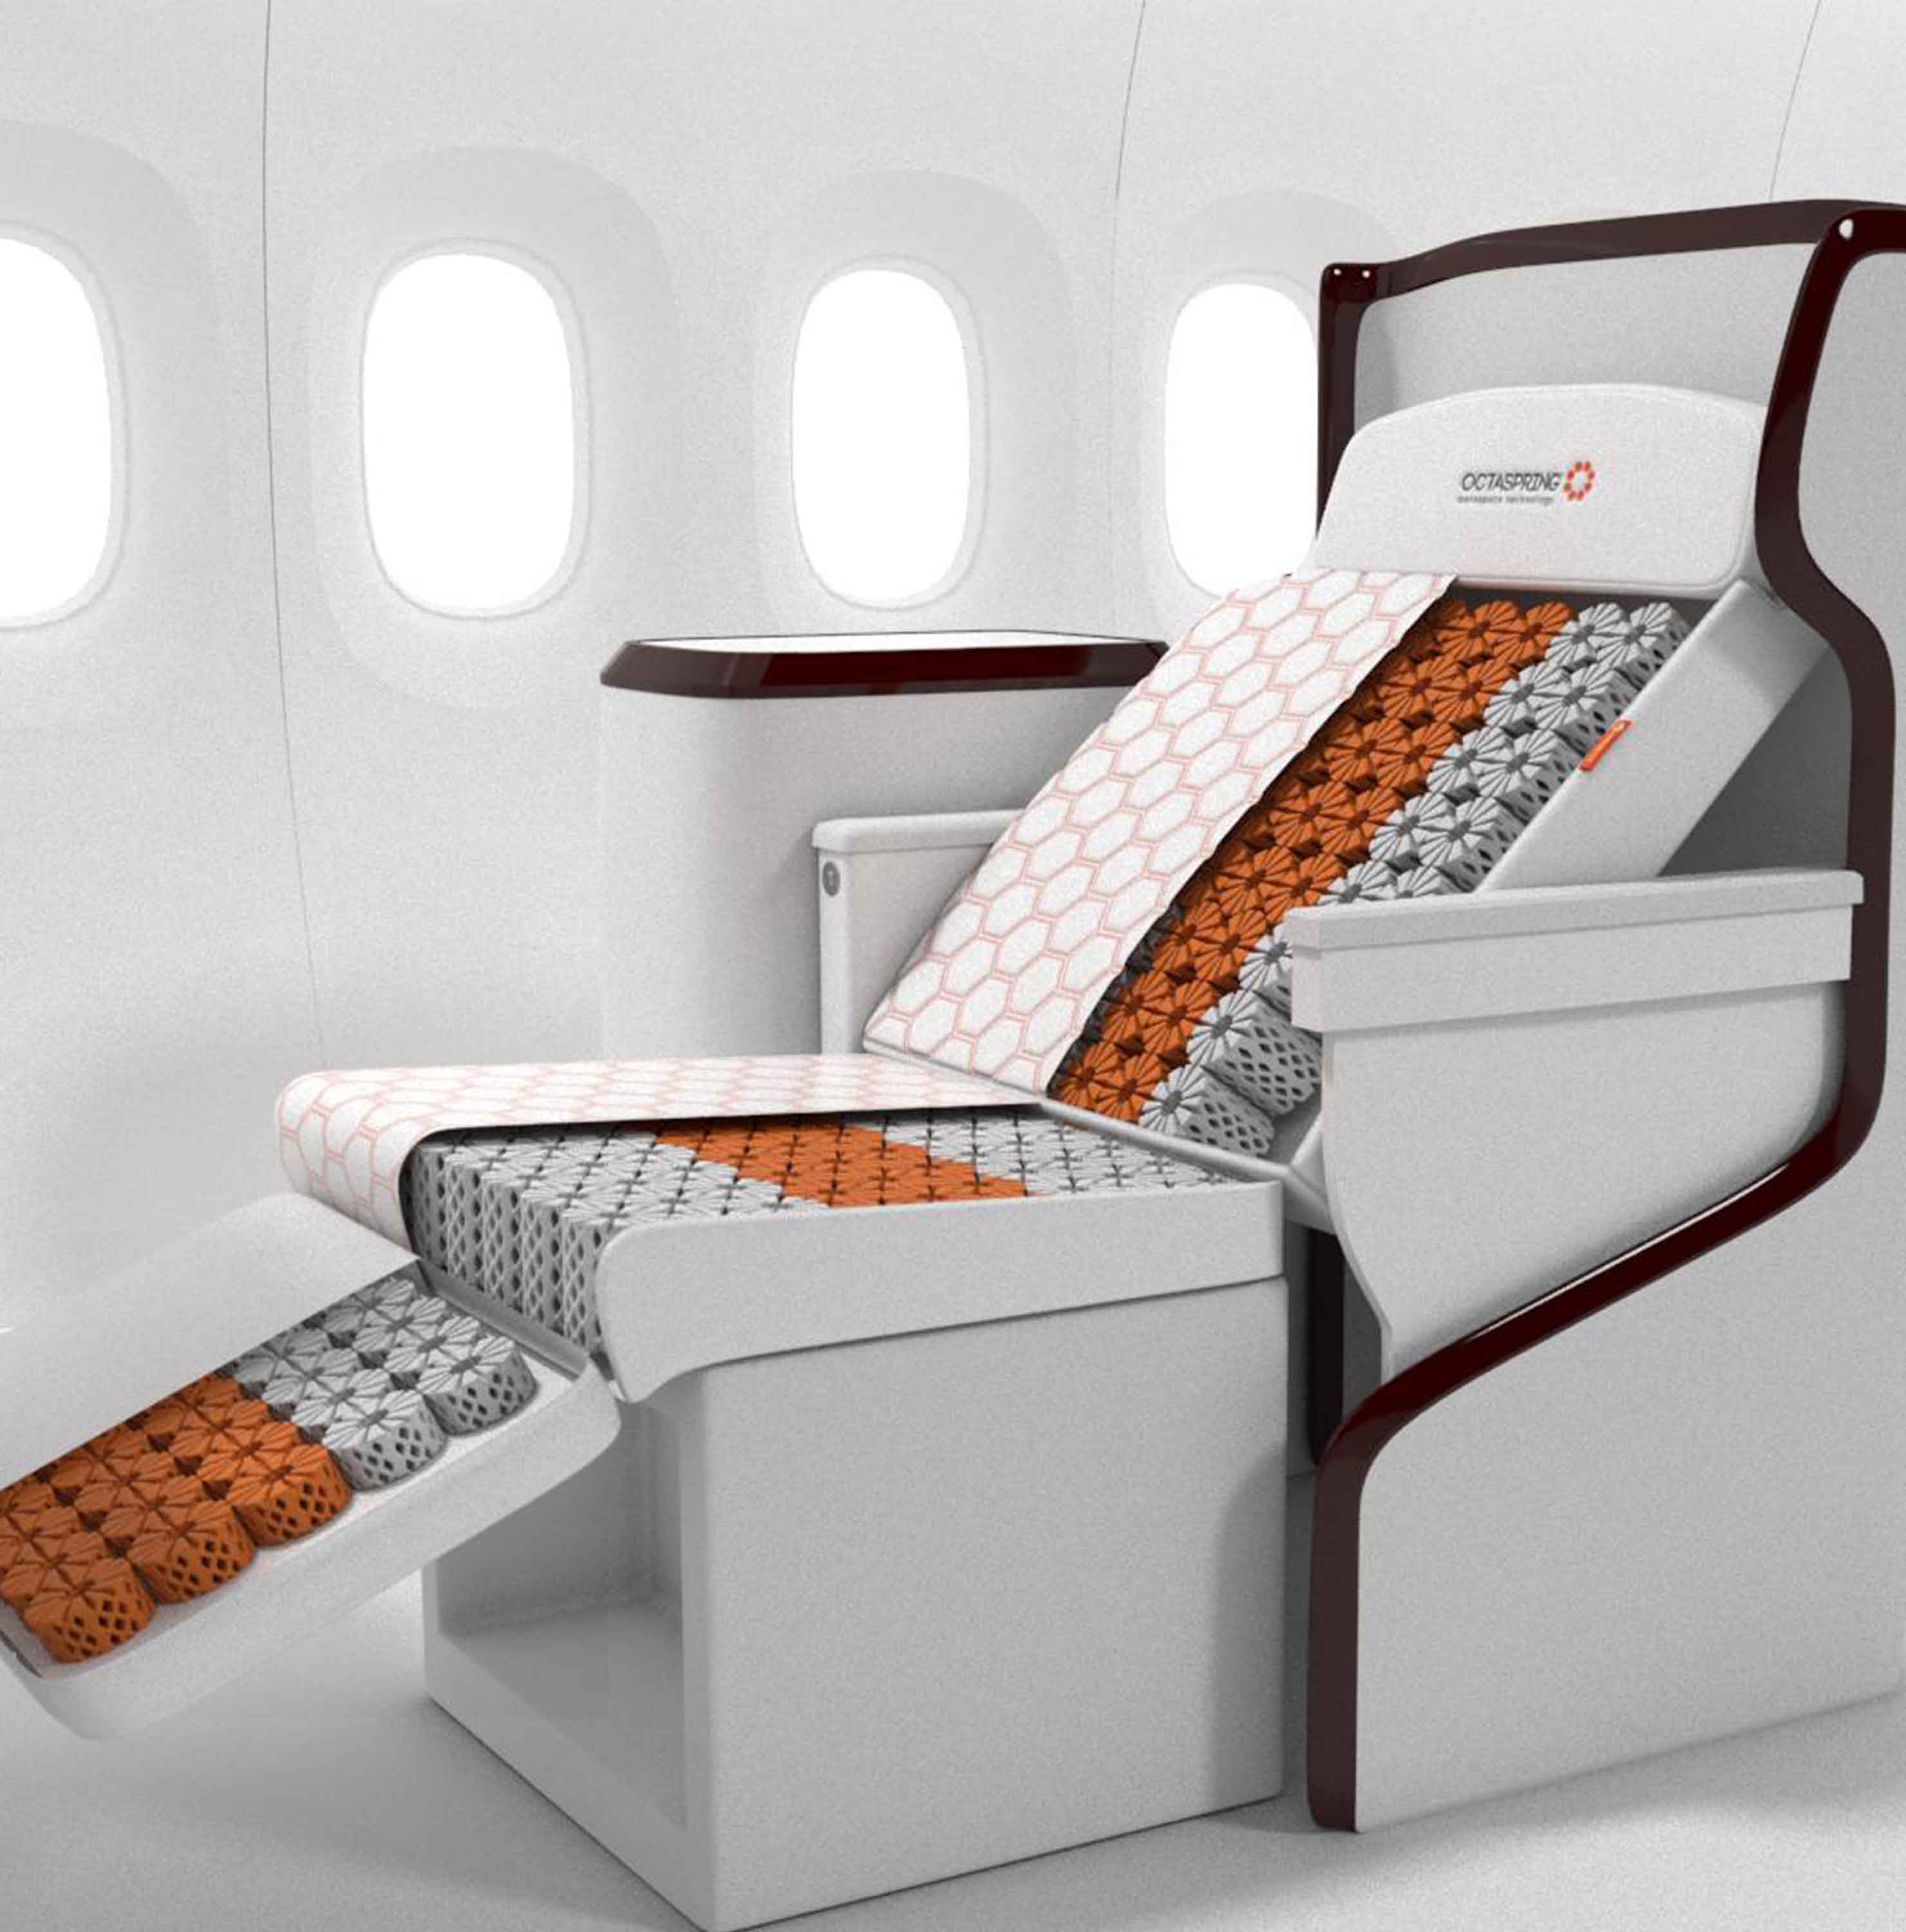 Business class seat cushions